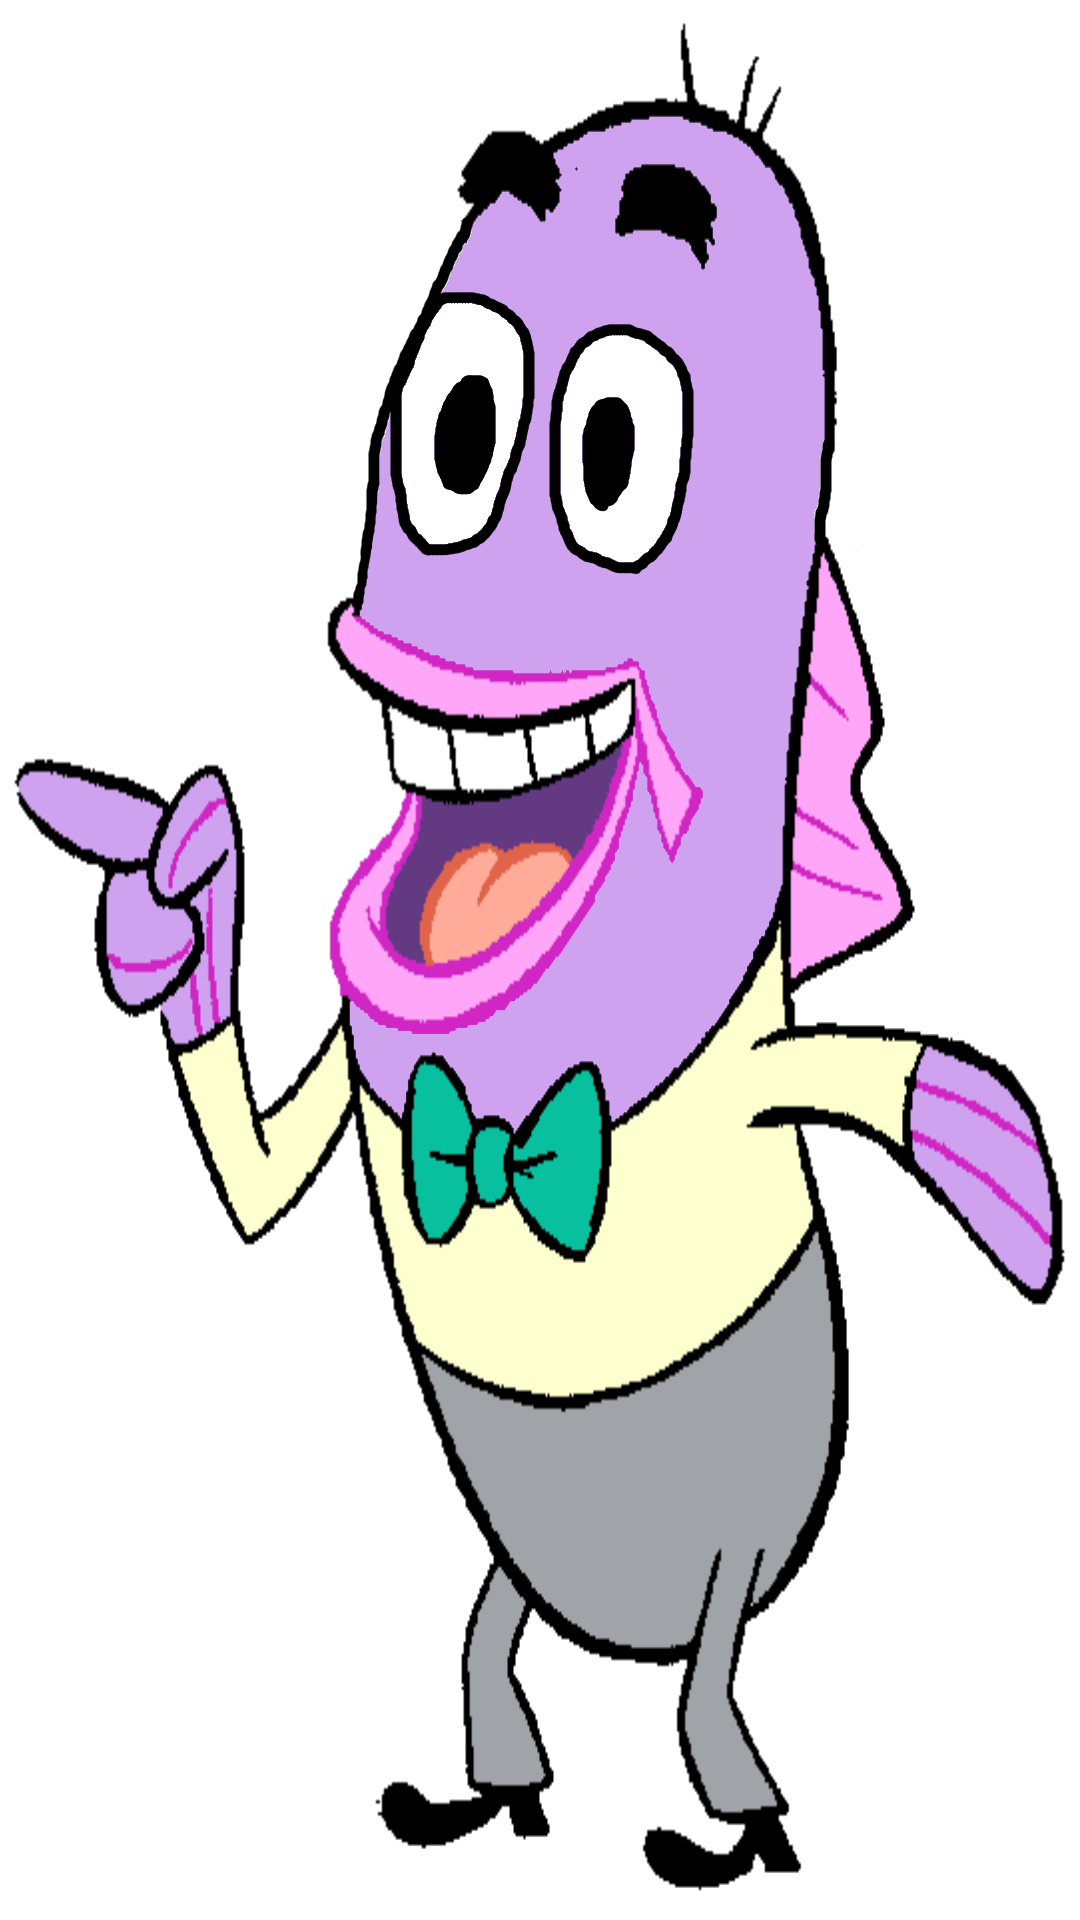 Milo J. Finkerfish without glasses by harounhaeder226 on DeviantArt